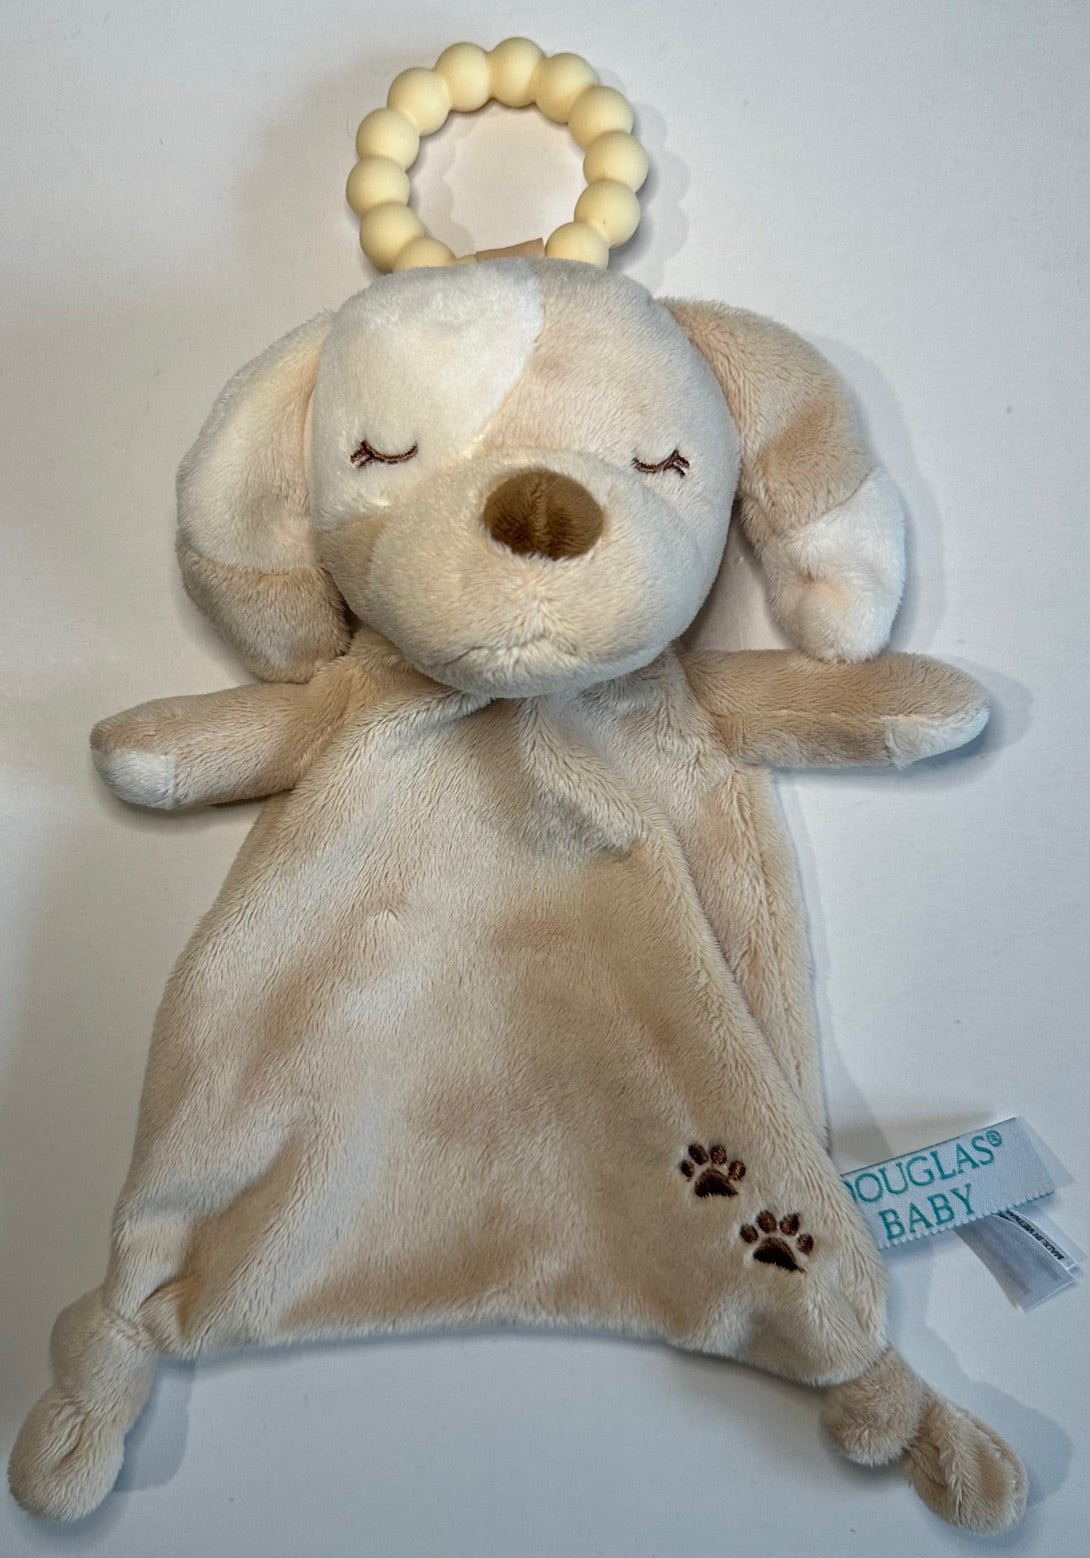 Douglas Baby, Beige Dog Lovey Toy with Teether